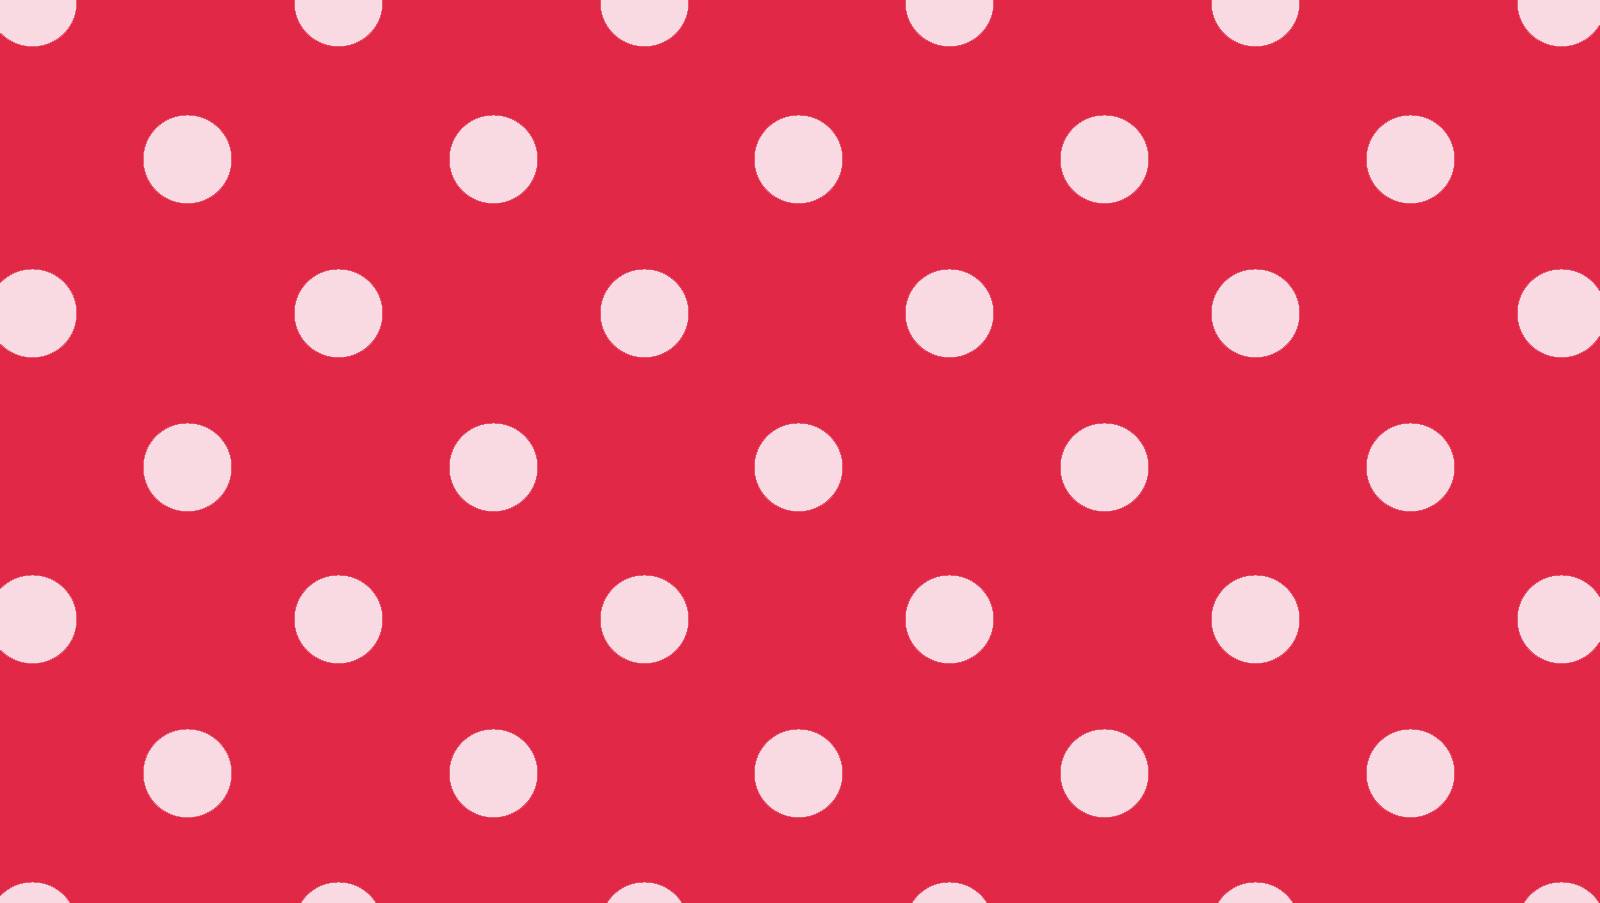 Free Download Red And White Polka Dot Background By Stampmakerlkj